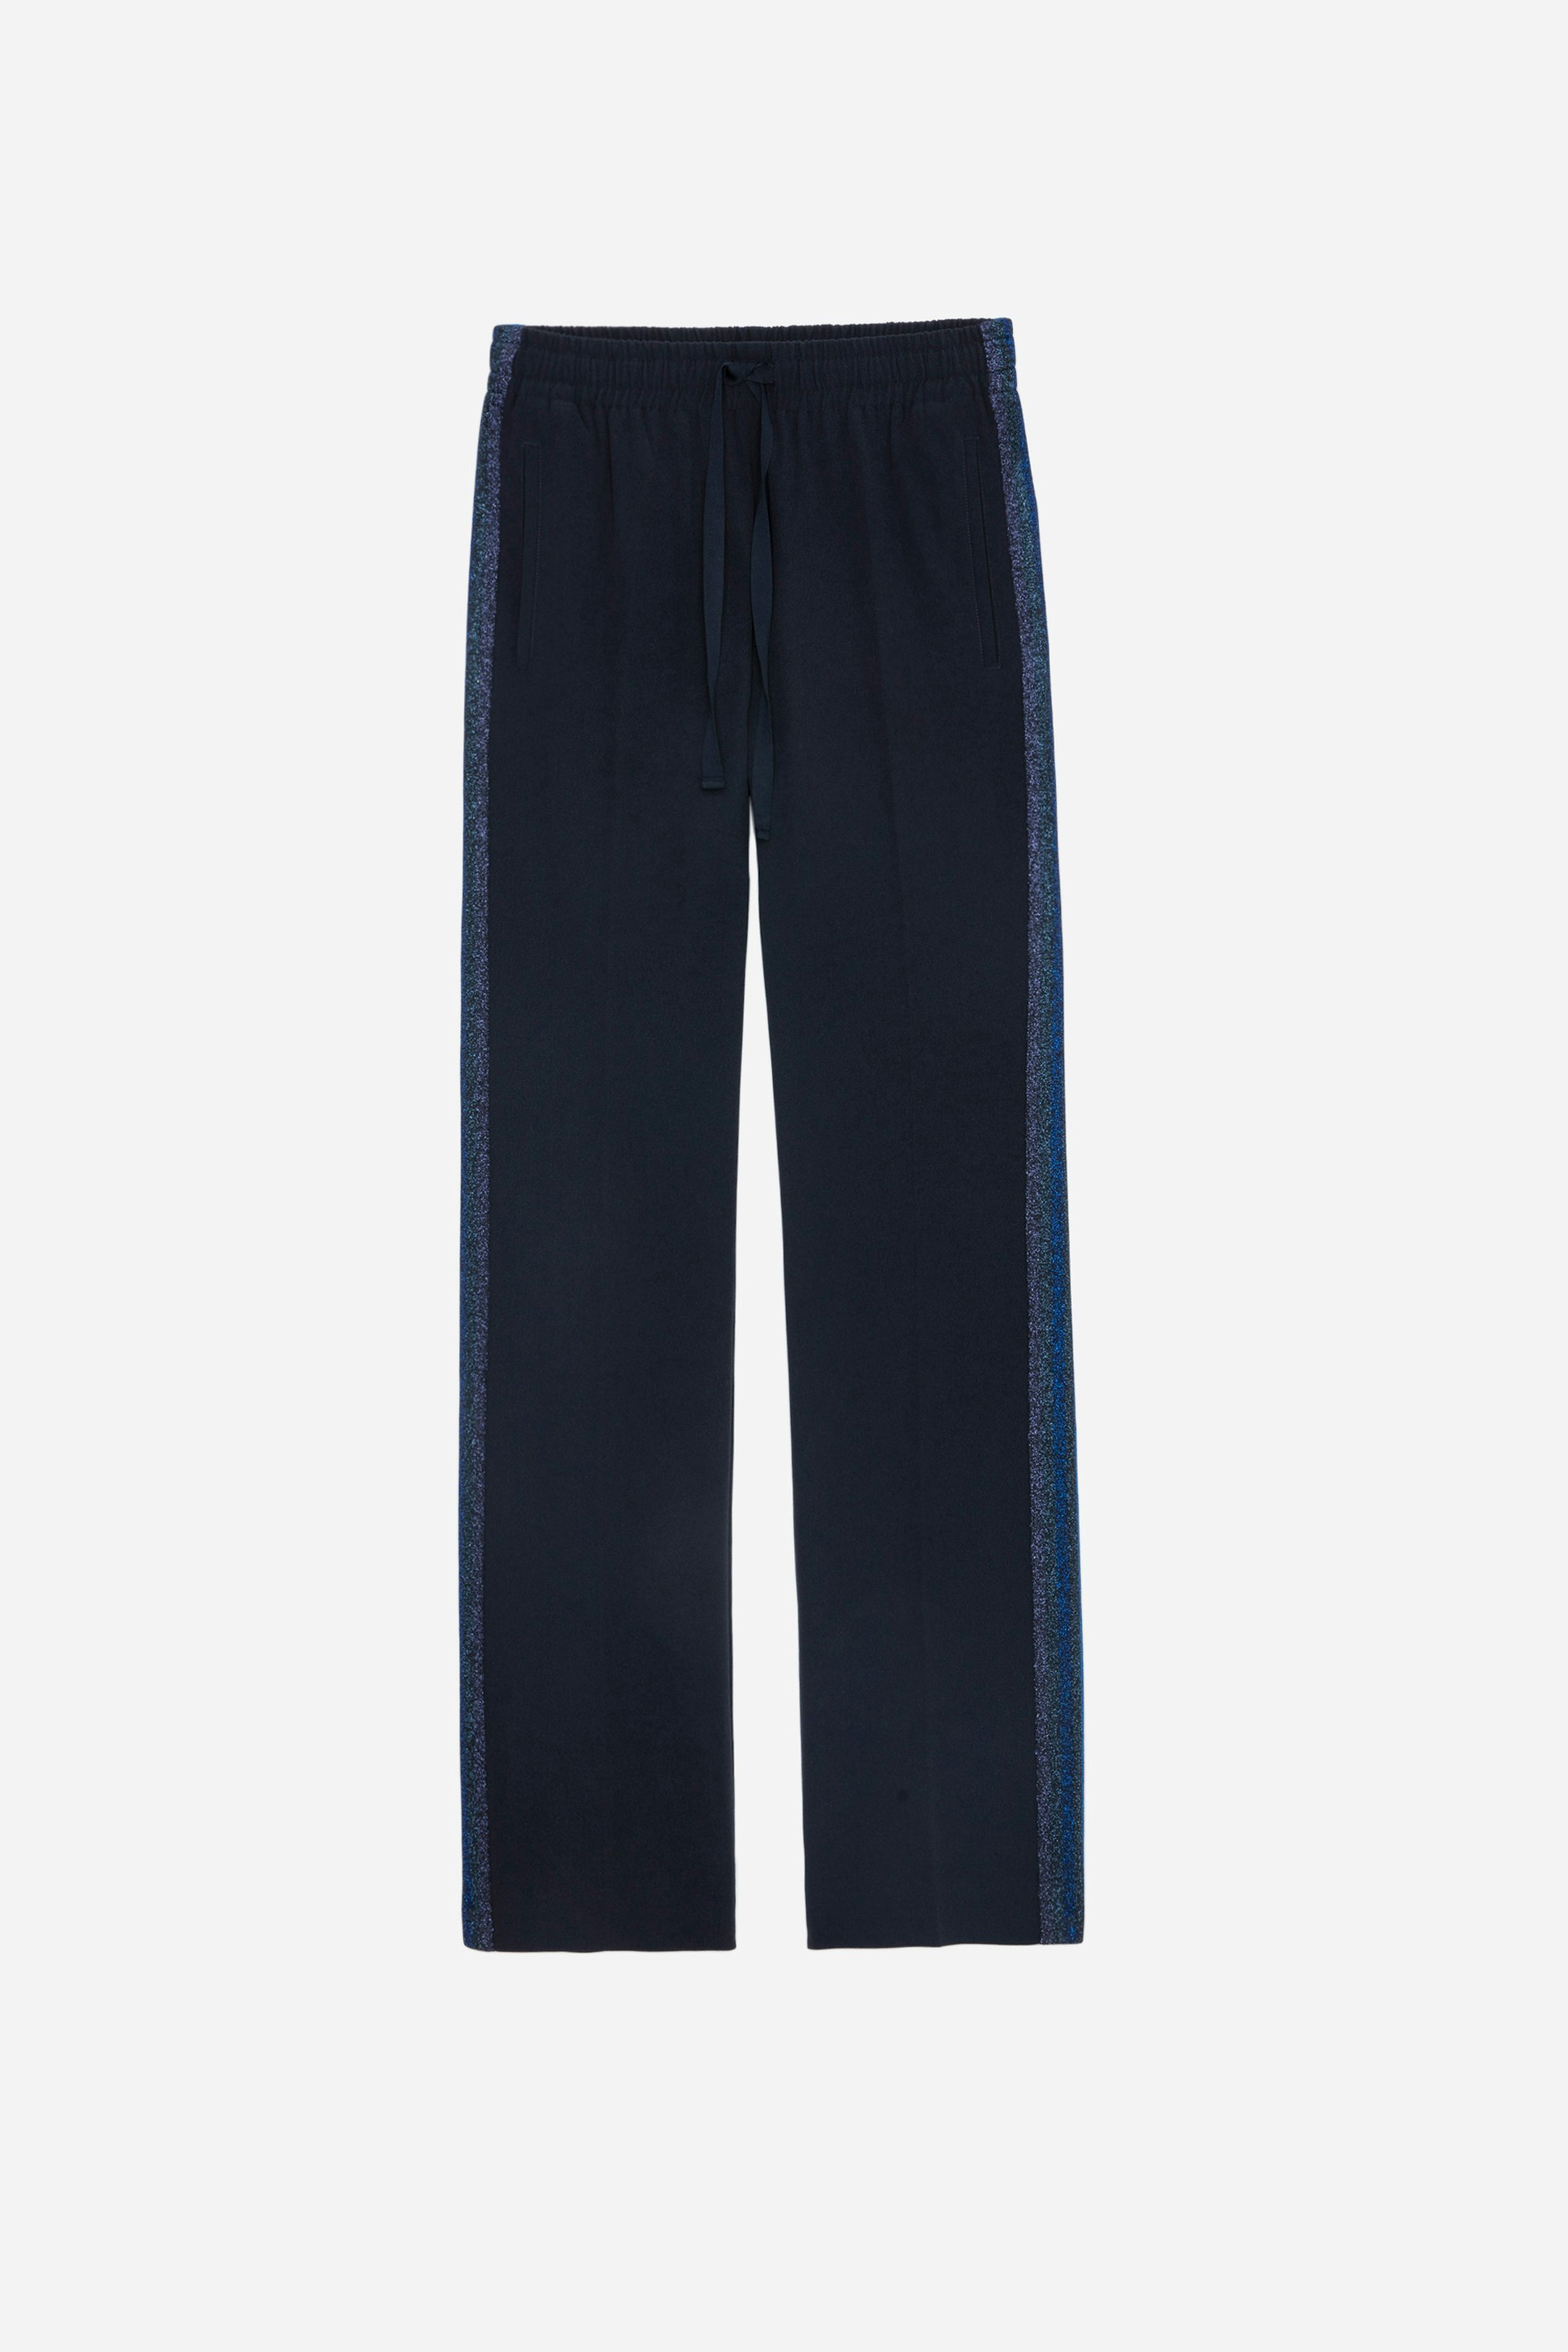 Pomy Trousers Women’s navy blue crepe trousers with glittery side bands